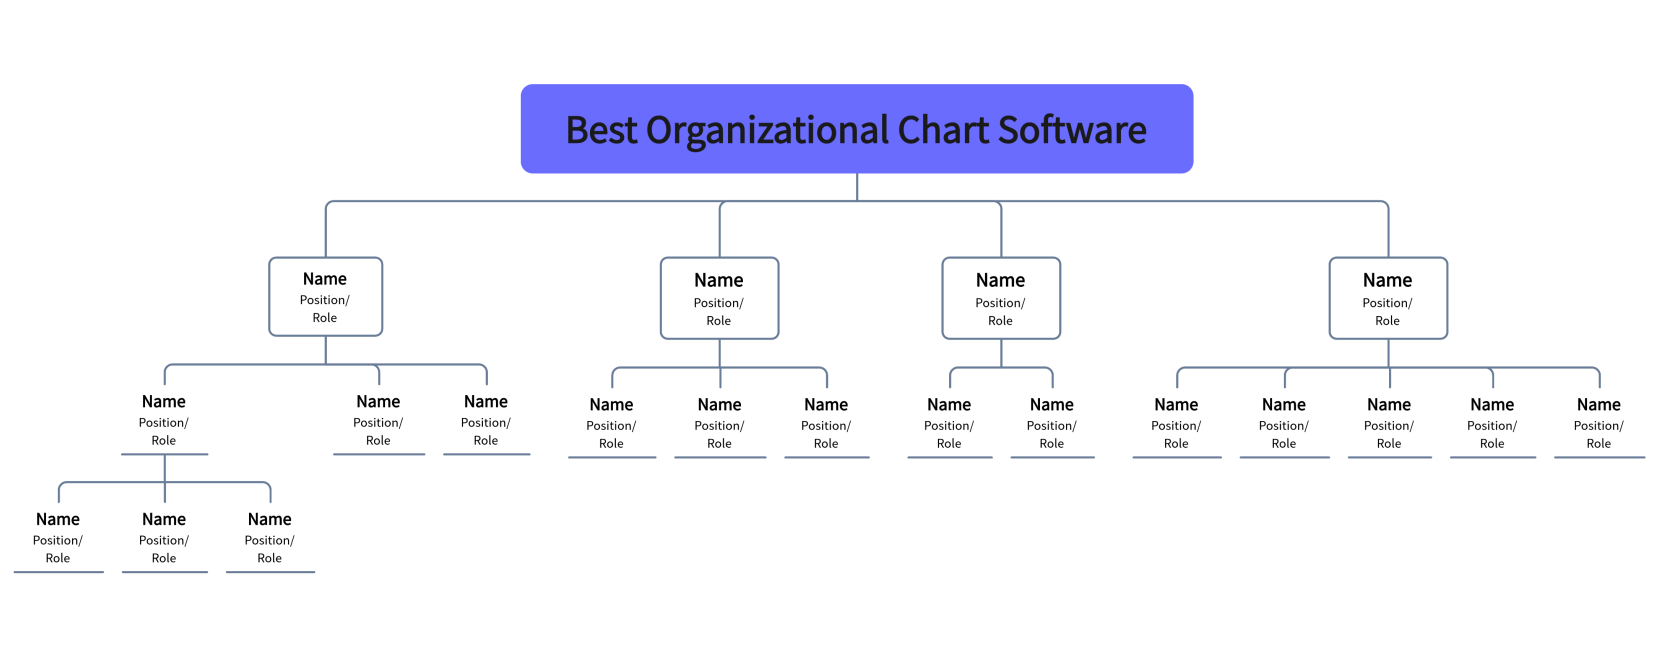 [2023] What Is the Best Organizational Chart Software